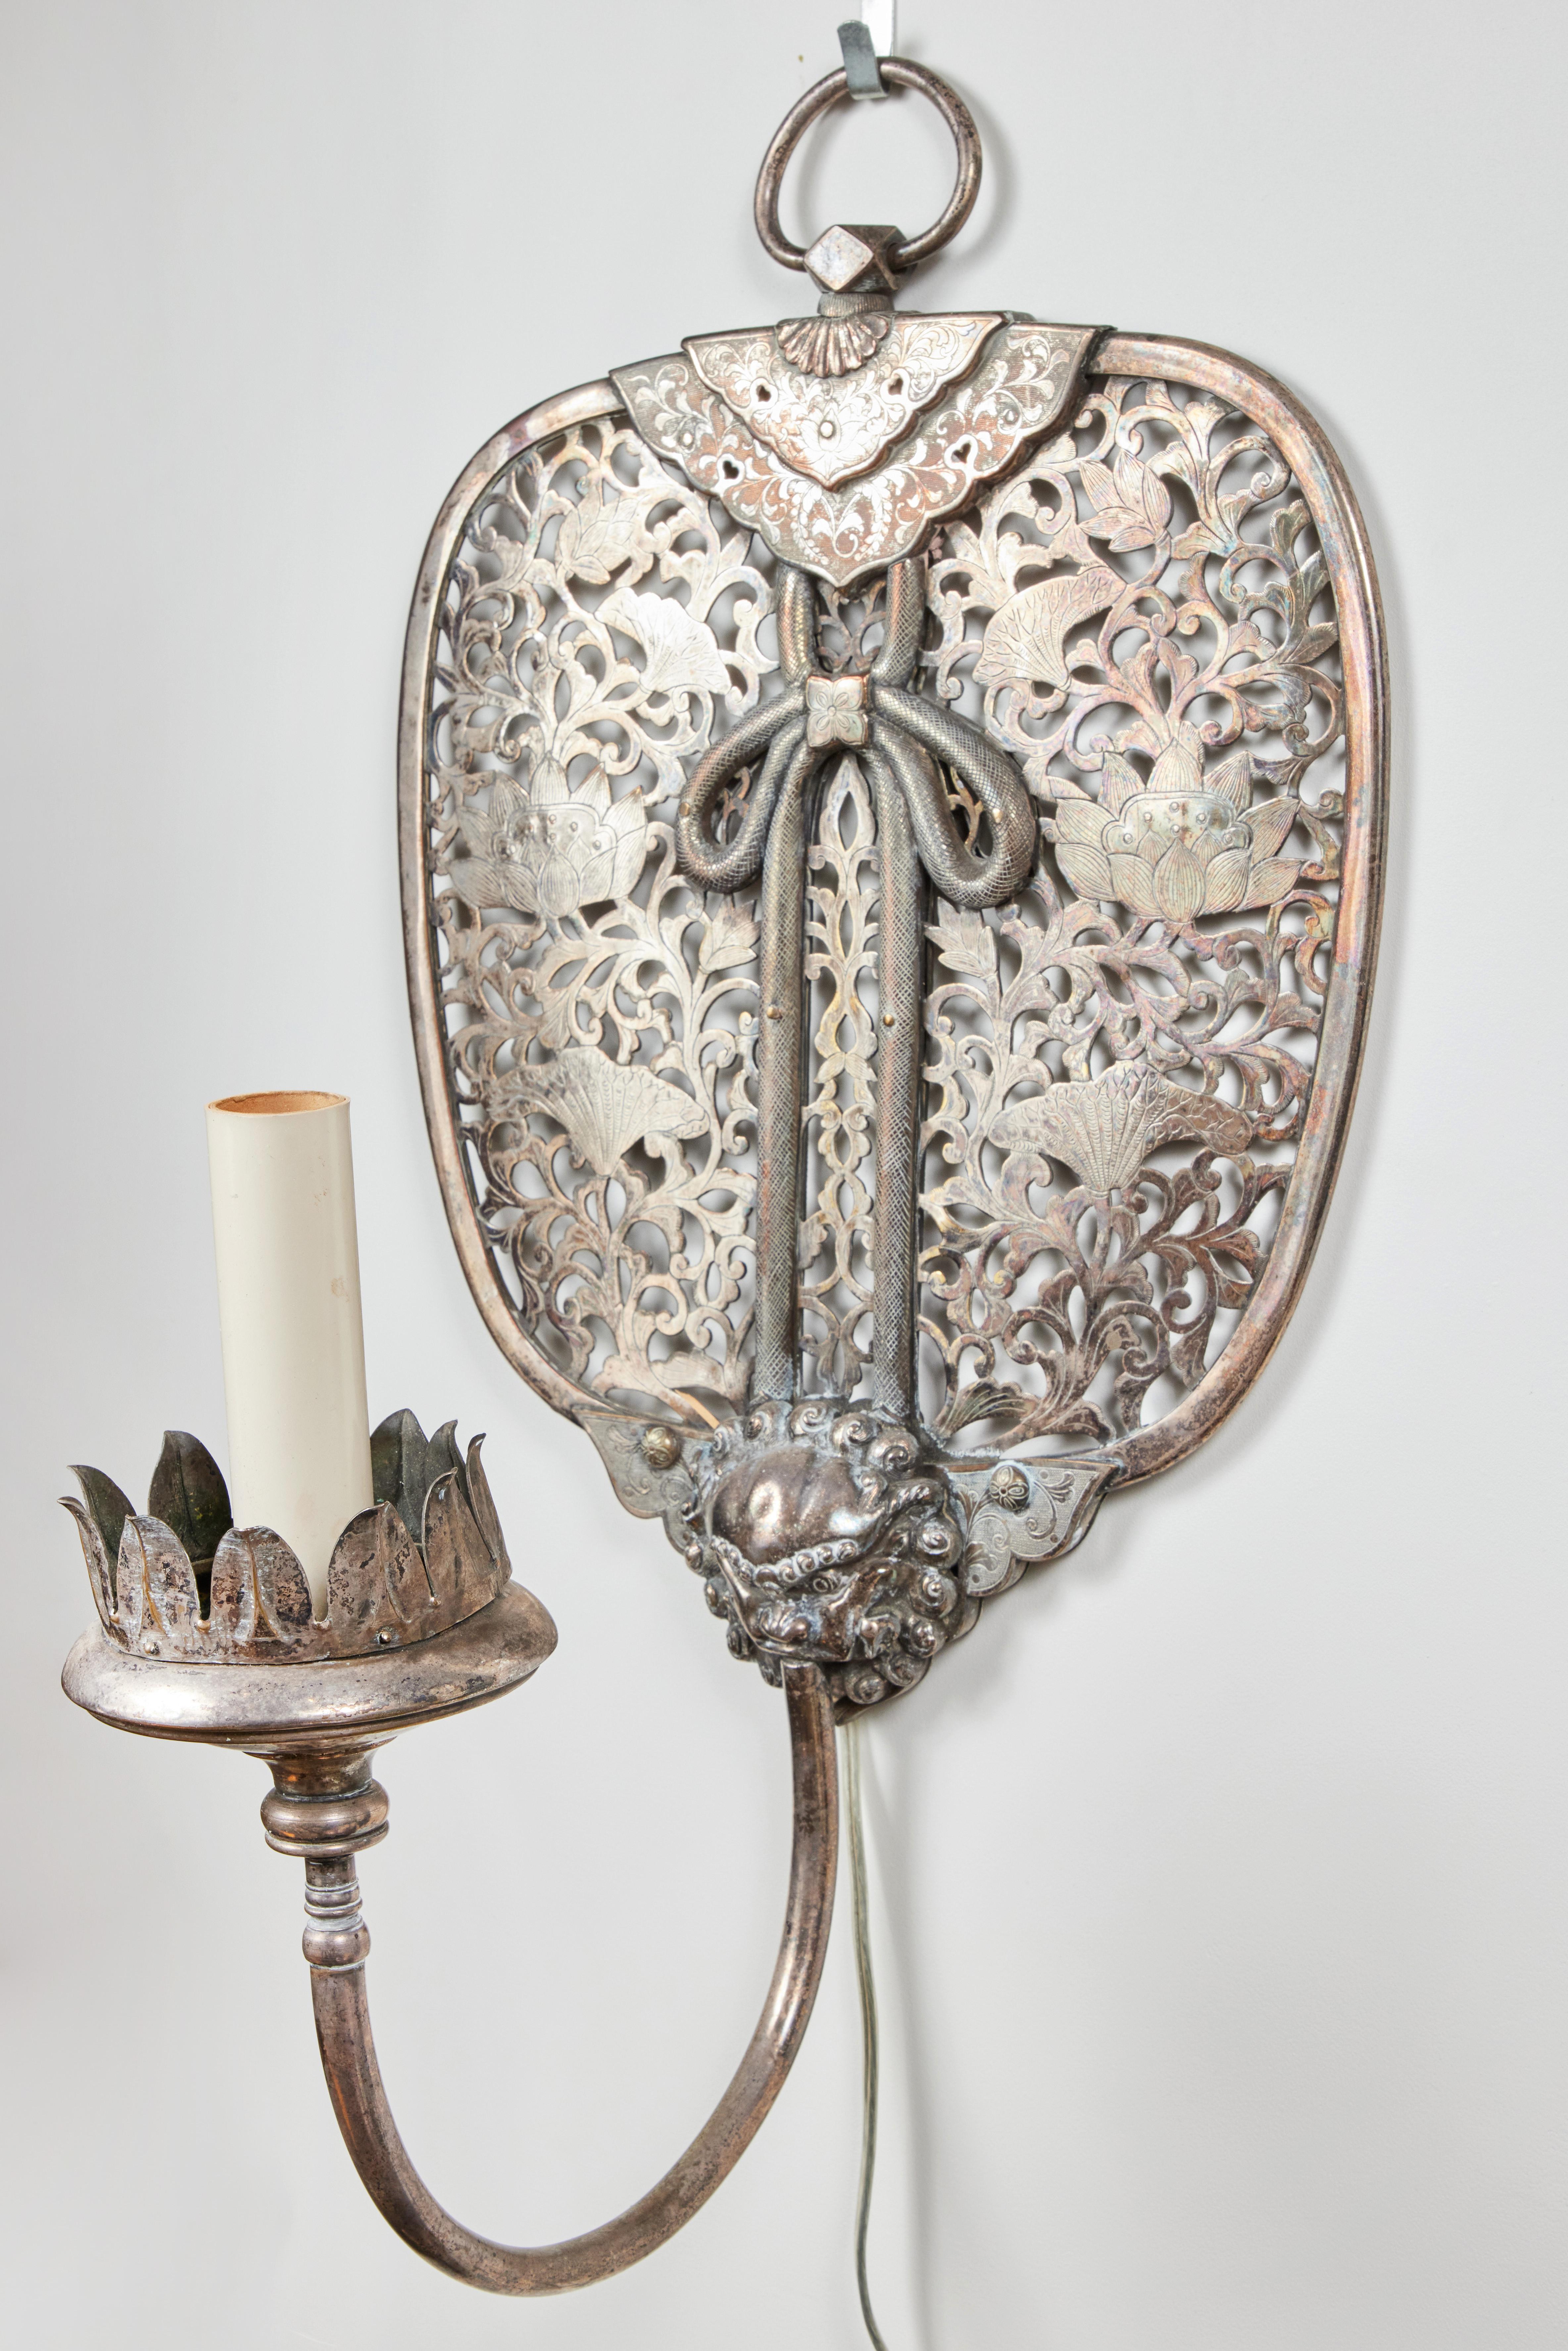 A pair of remarkable, silvered, French wall sconces in the Chinoiserie style. Each with large, pierced screens filled with blossoming lotus flowers surrounded by foliate scrolls and centered with a dripping bow that descends to a foo dog grasping a